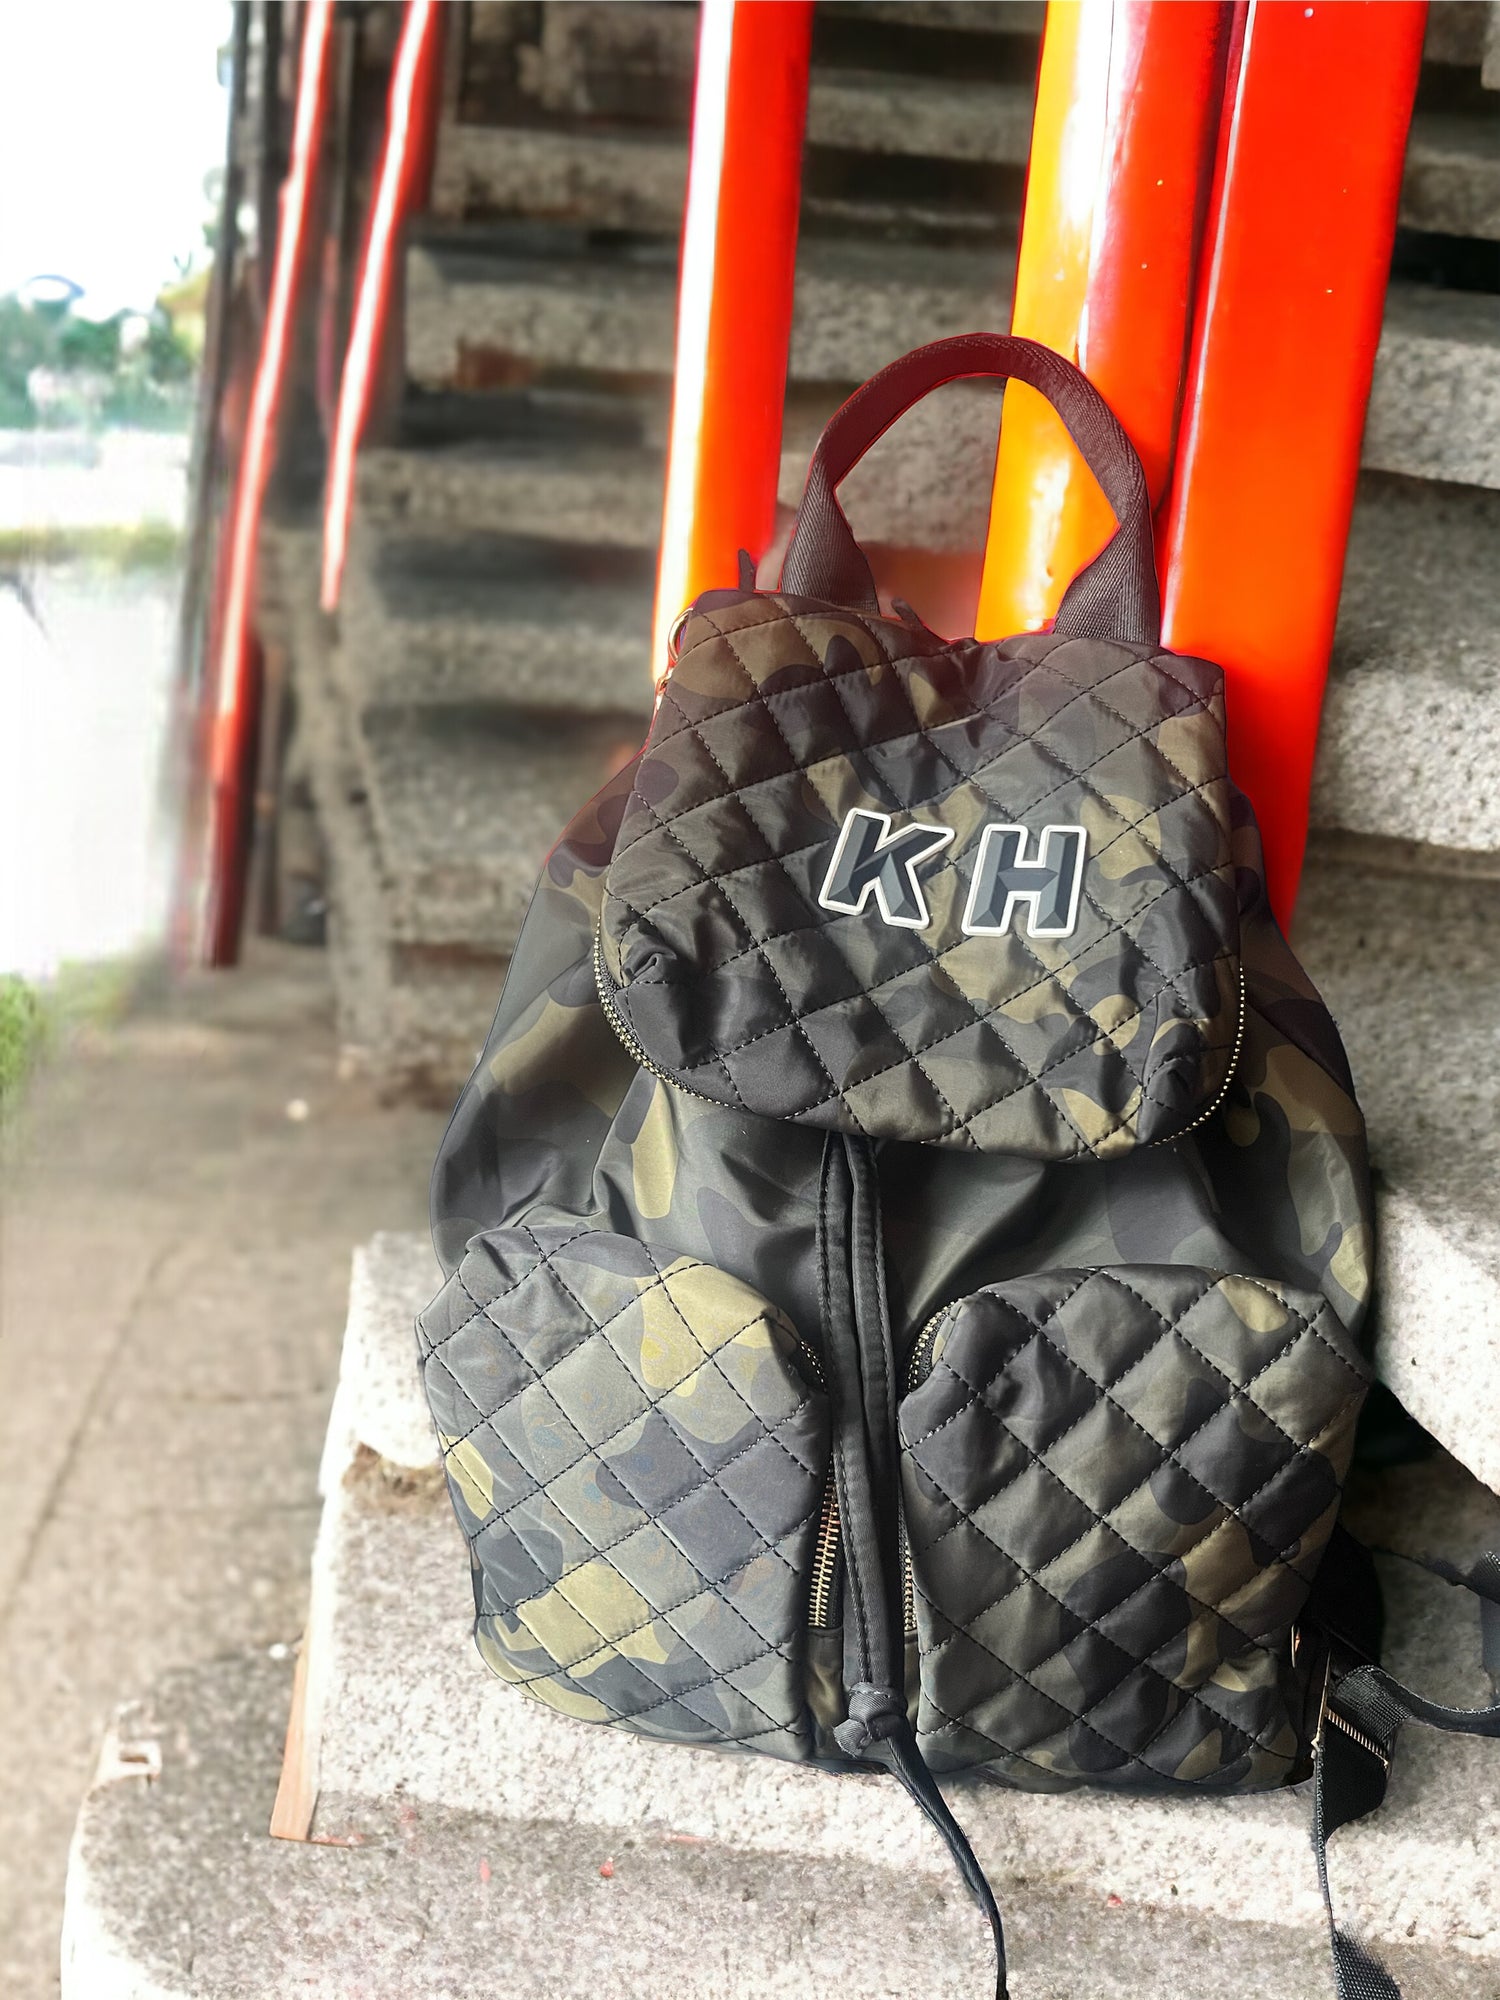 Personalised quilted rucksack